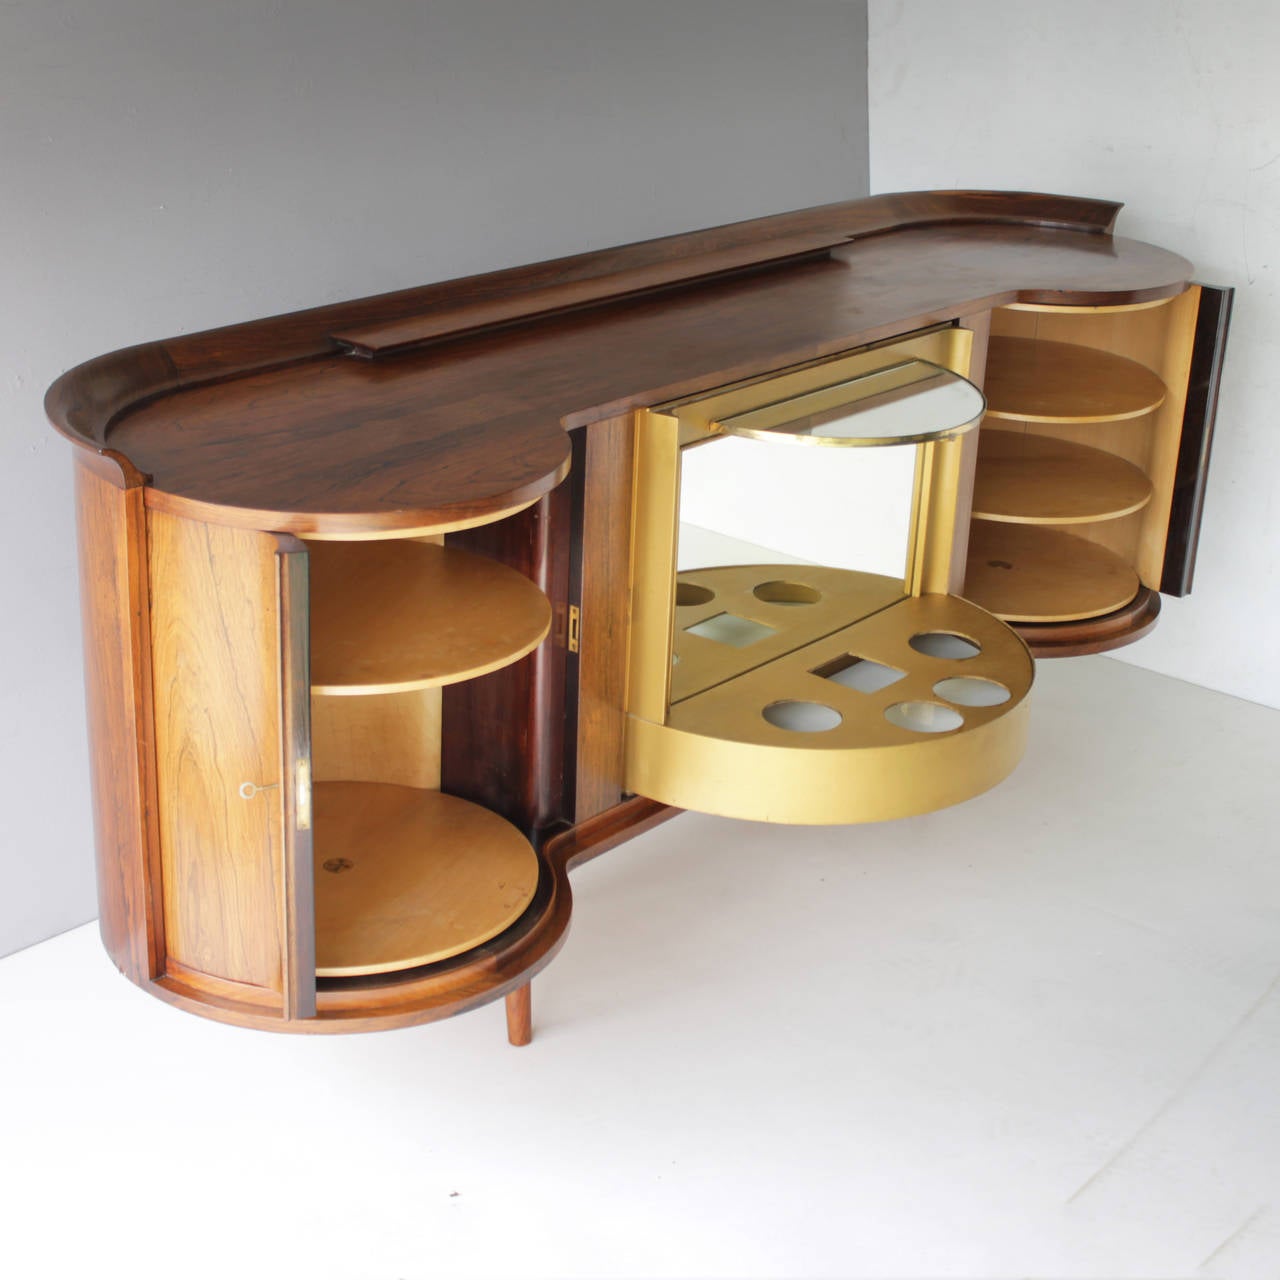 Dry bar in rosewood, design by A.A. Patijn for Zijlstra, Joure Holland. Complete and in a good condition. Interior in birch and mirror glass.